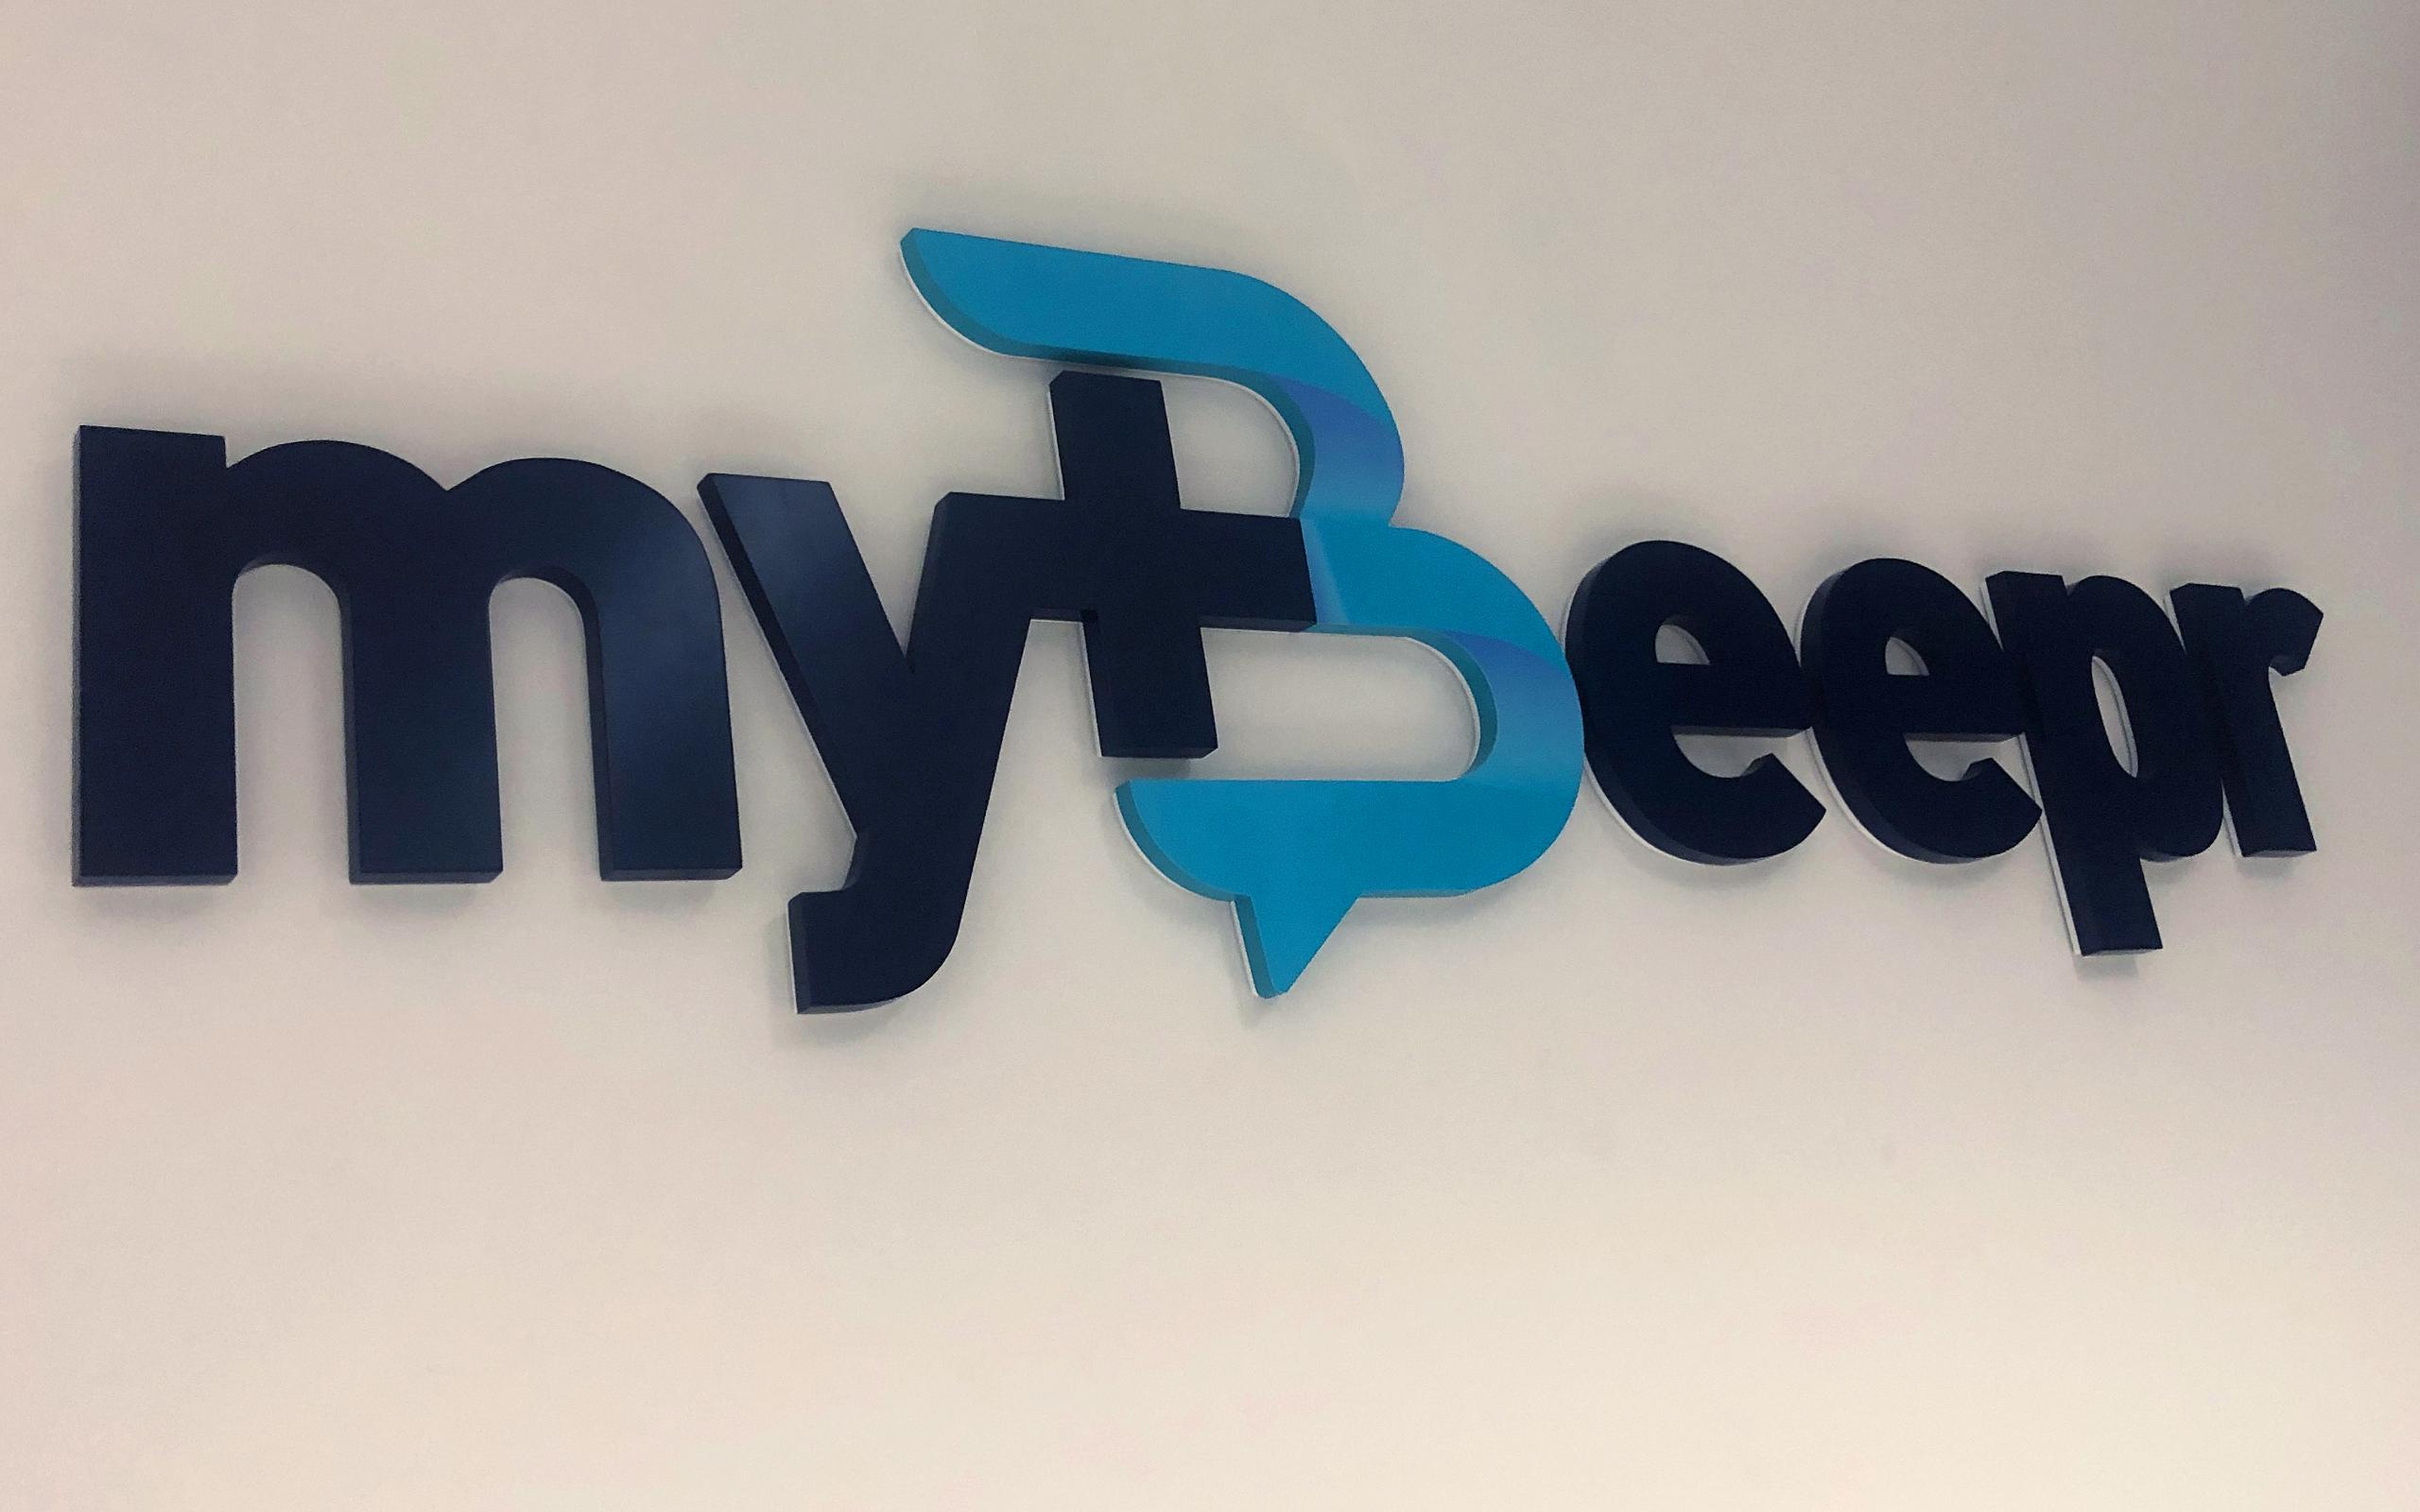 mybeeper office sign logo with depth